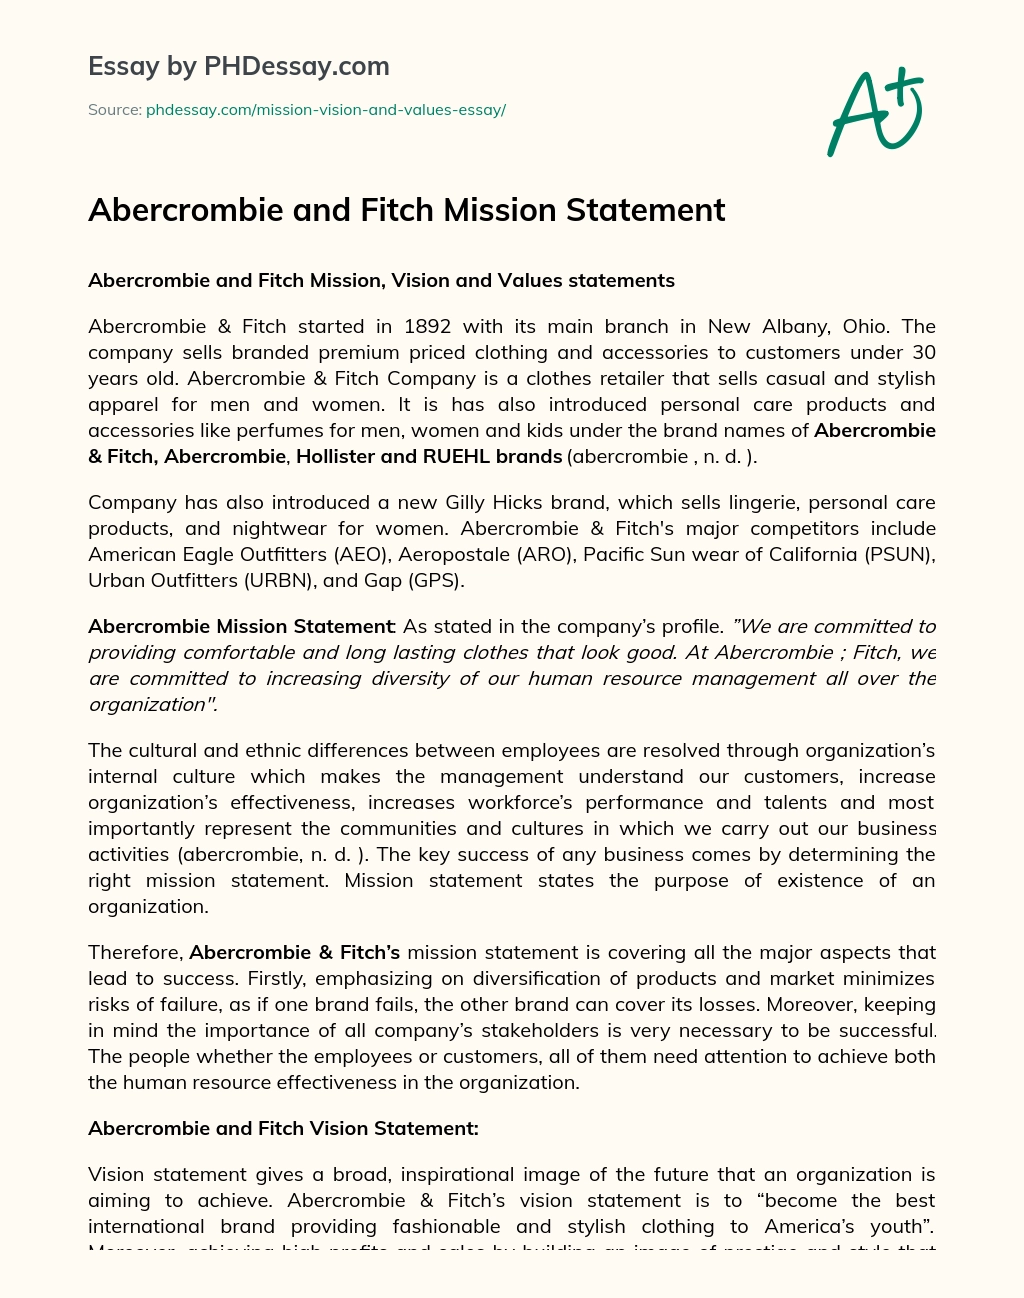 Abercrombie and Fitch Mission Statement essay